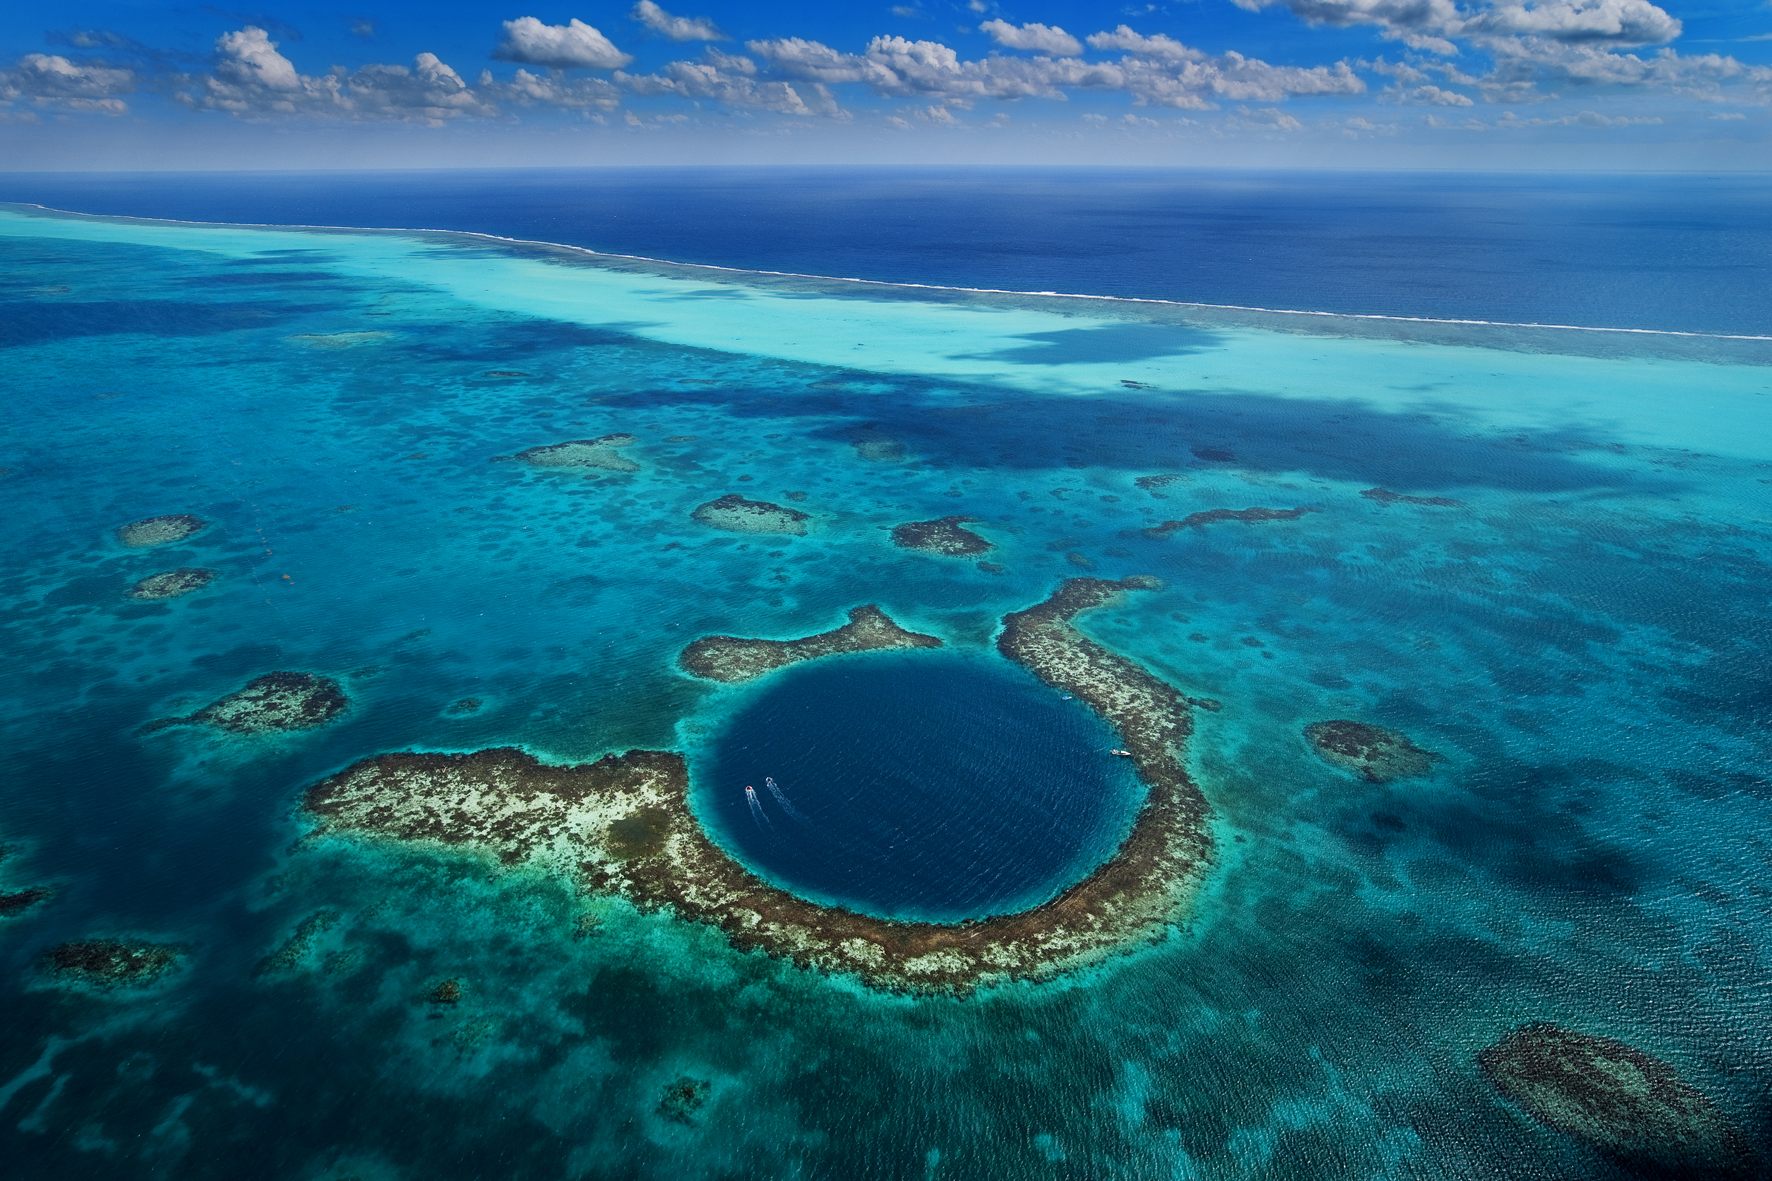 Taking a Scenic Flight Over the Great Blue Hole of Belize